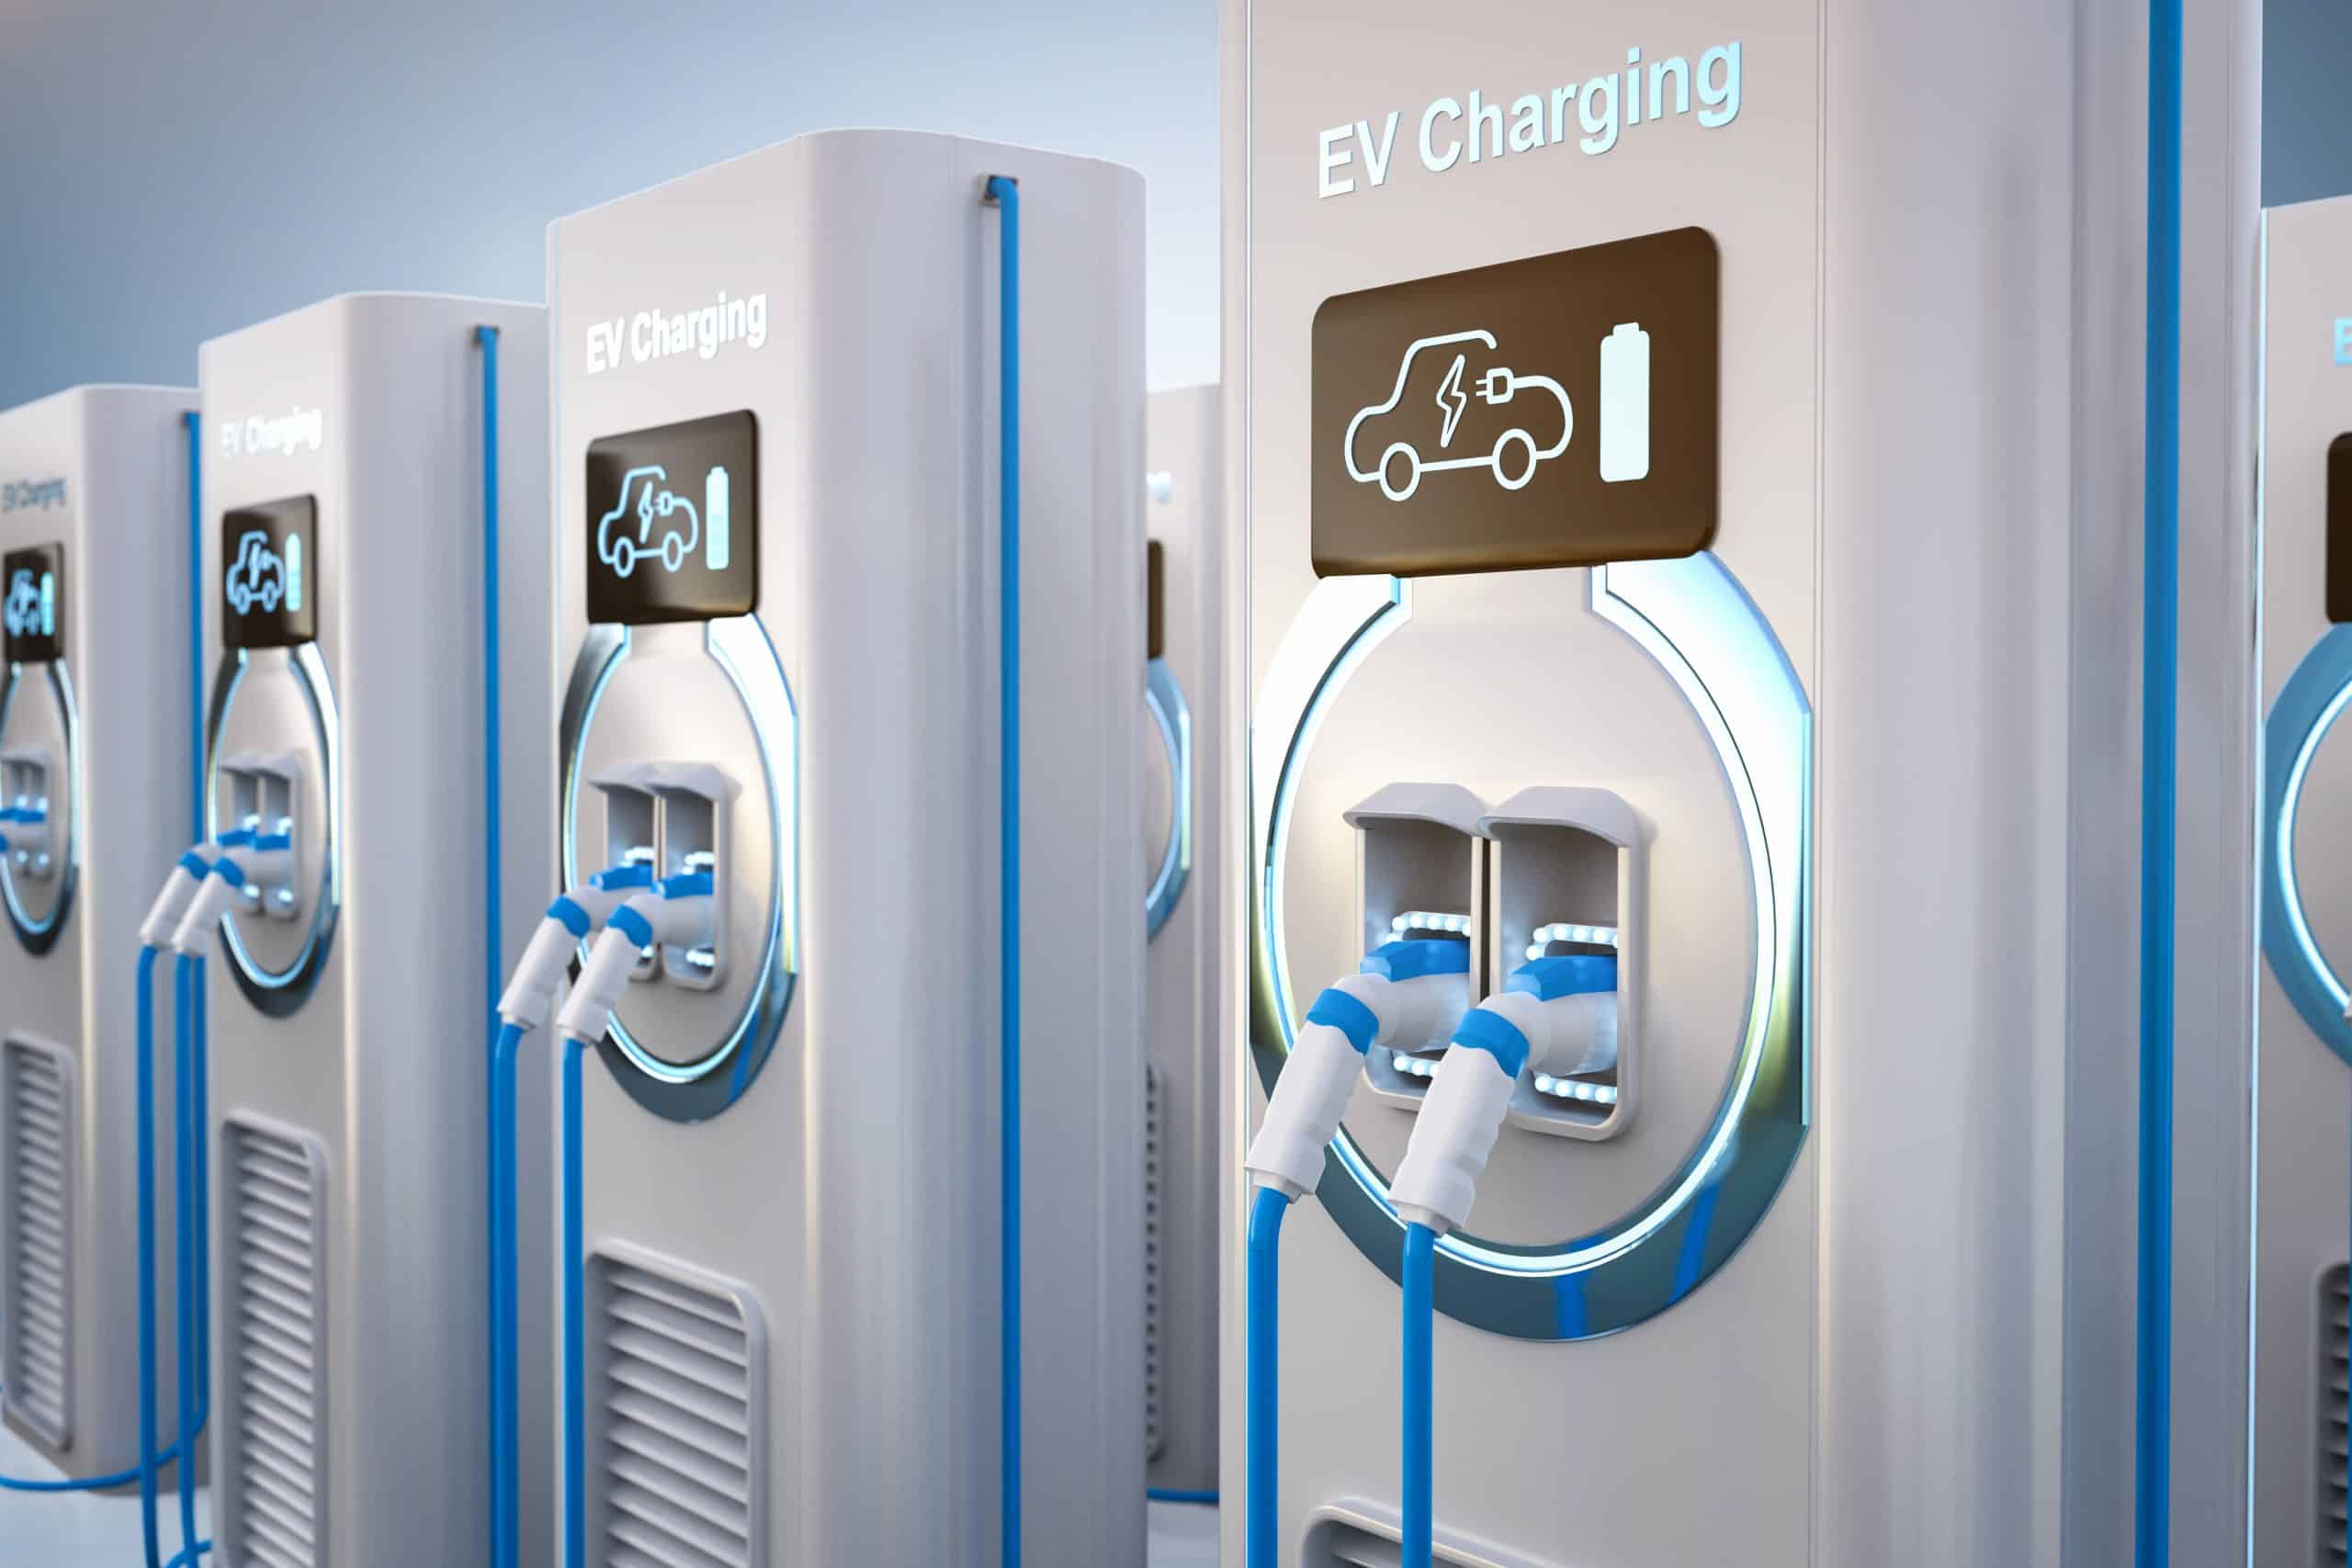 Octopus Energy Generation funds EV charging infrastructure in the North